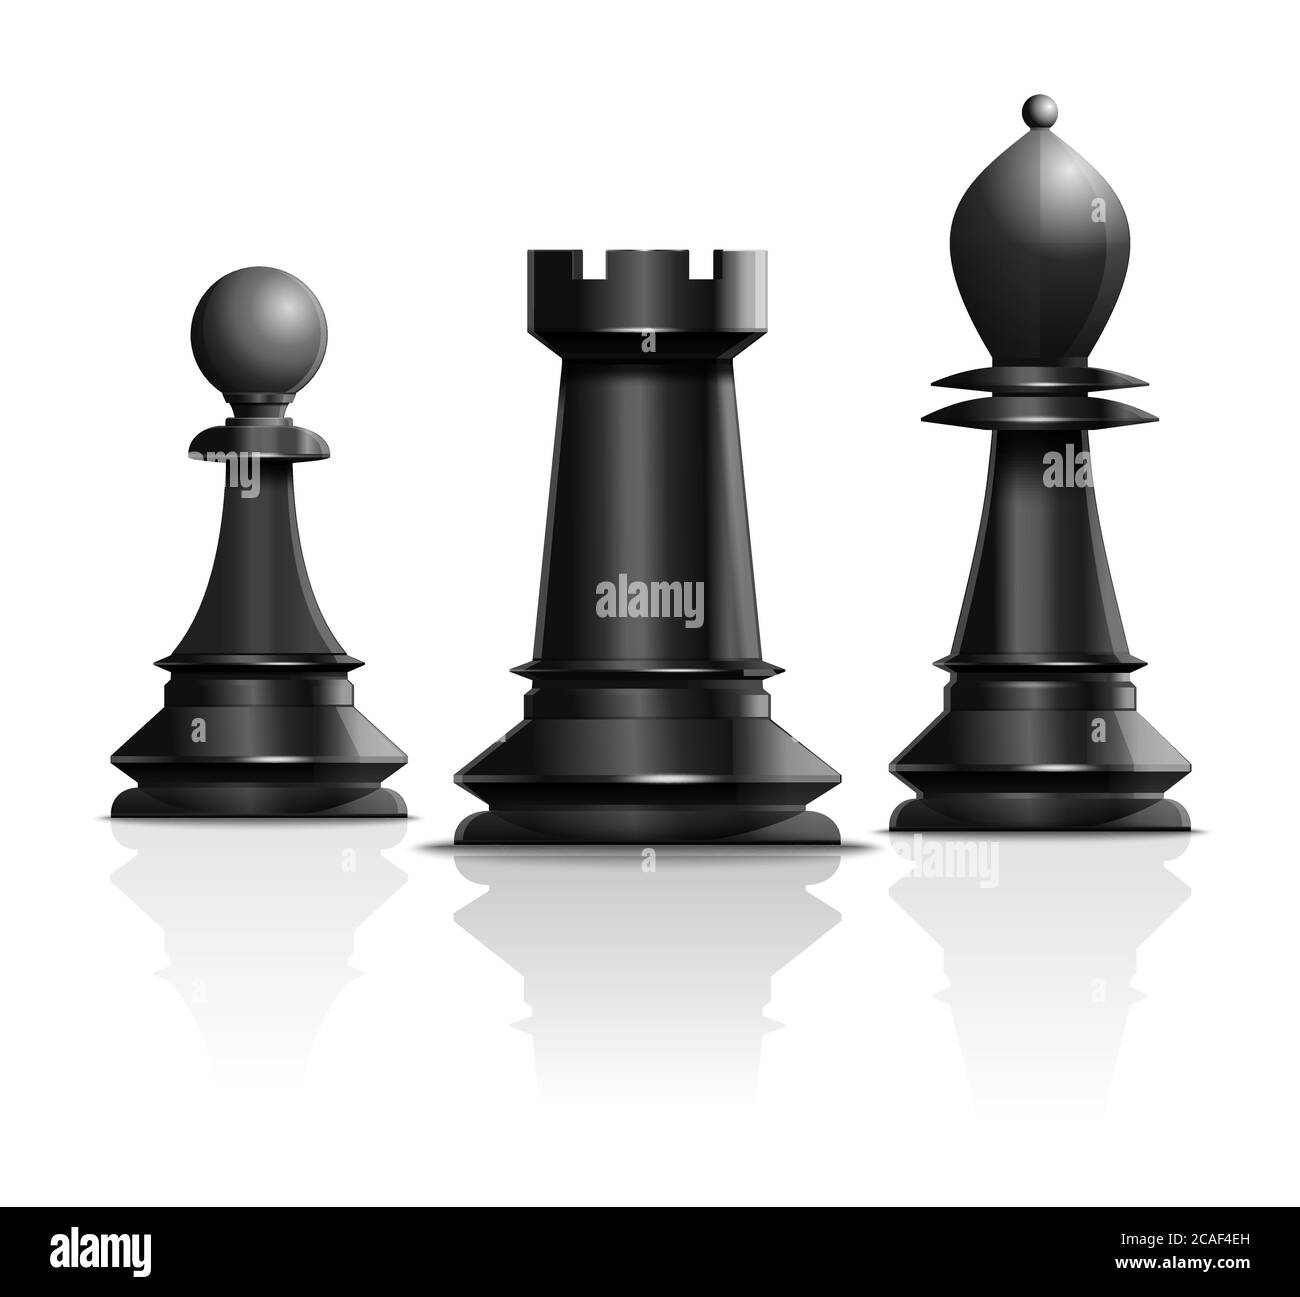 Close-up Of A Rook Chess Piece Stock Photo, Picture and Royalty Free Image.  Image 10236223.